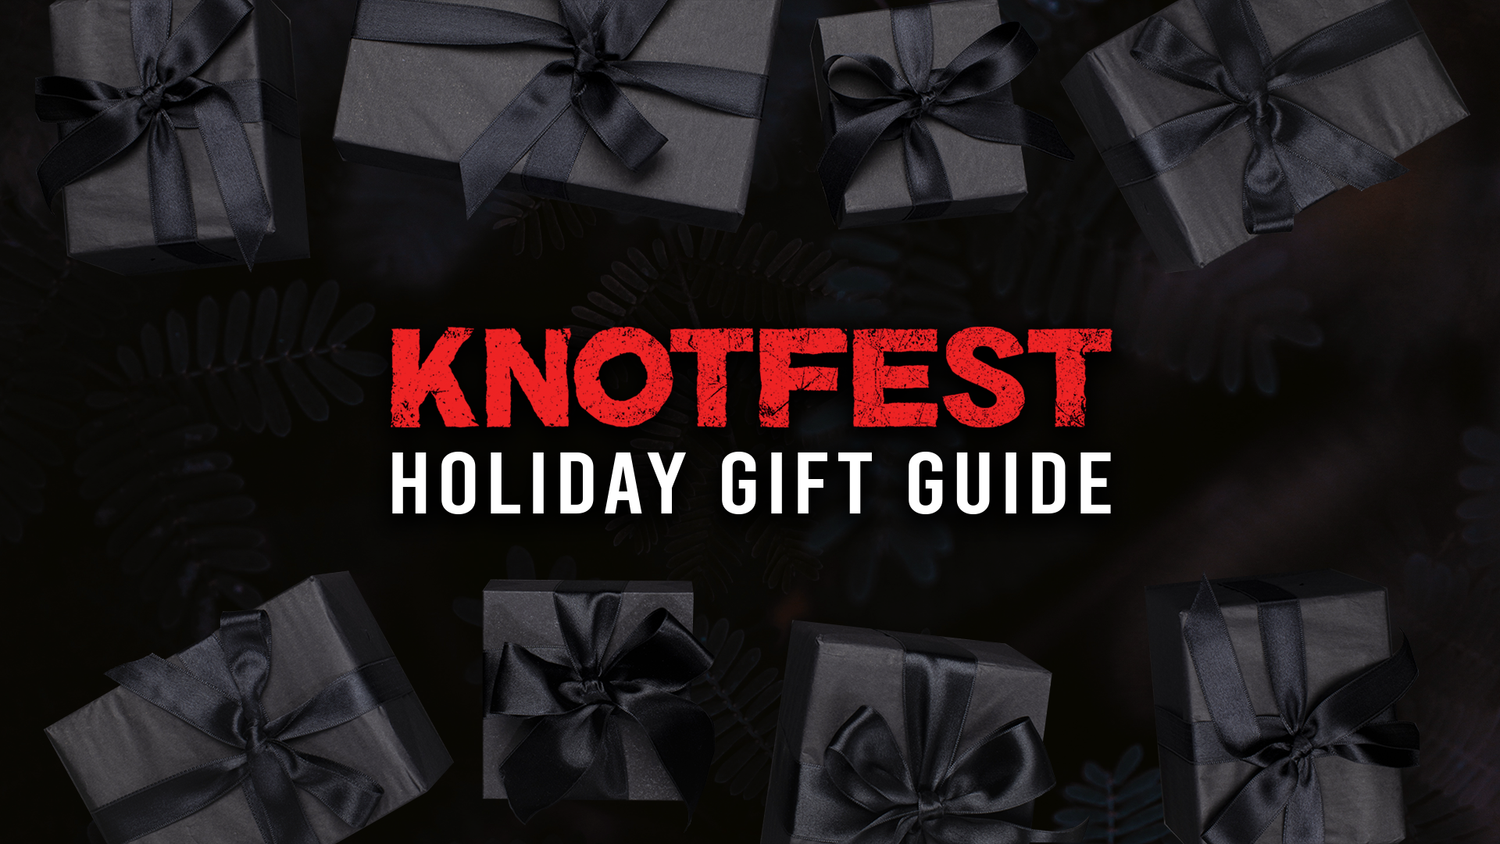 The KNOTFEST 2021 Holiday Gift Guide